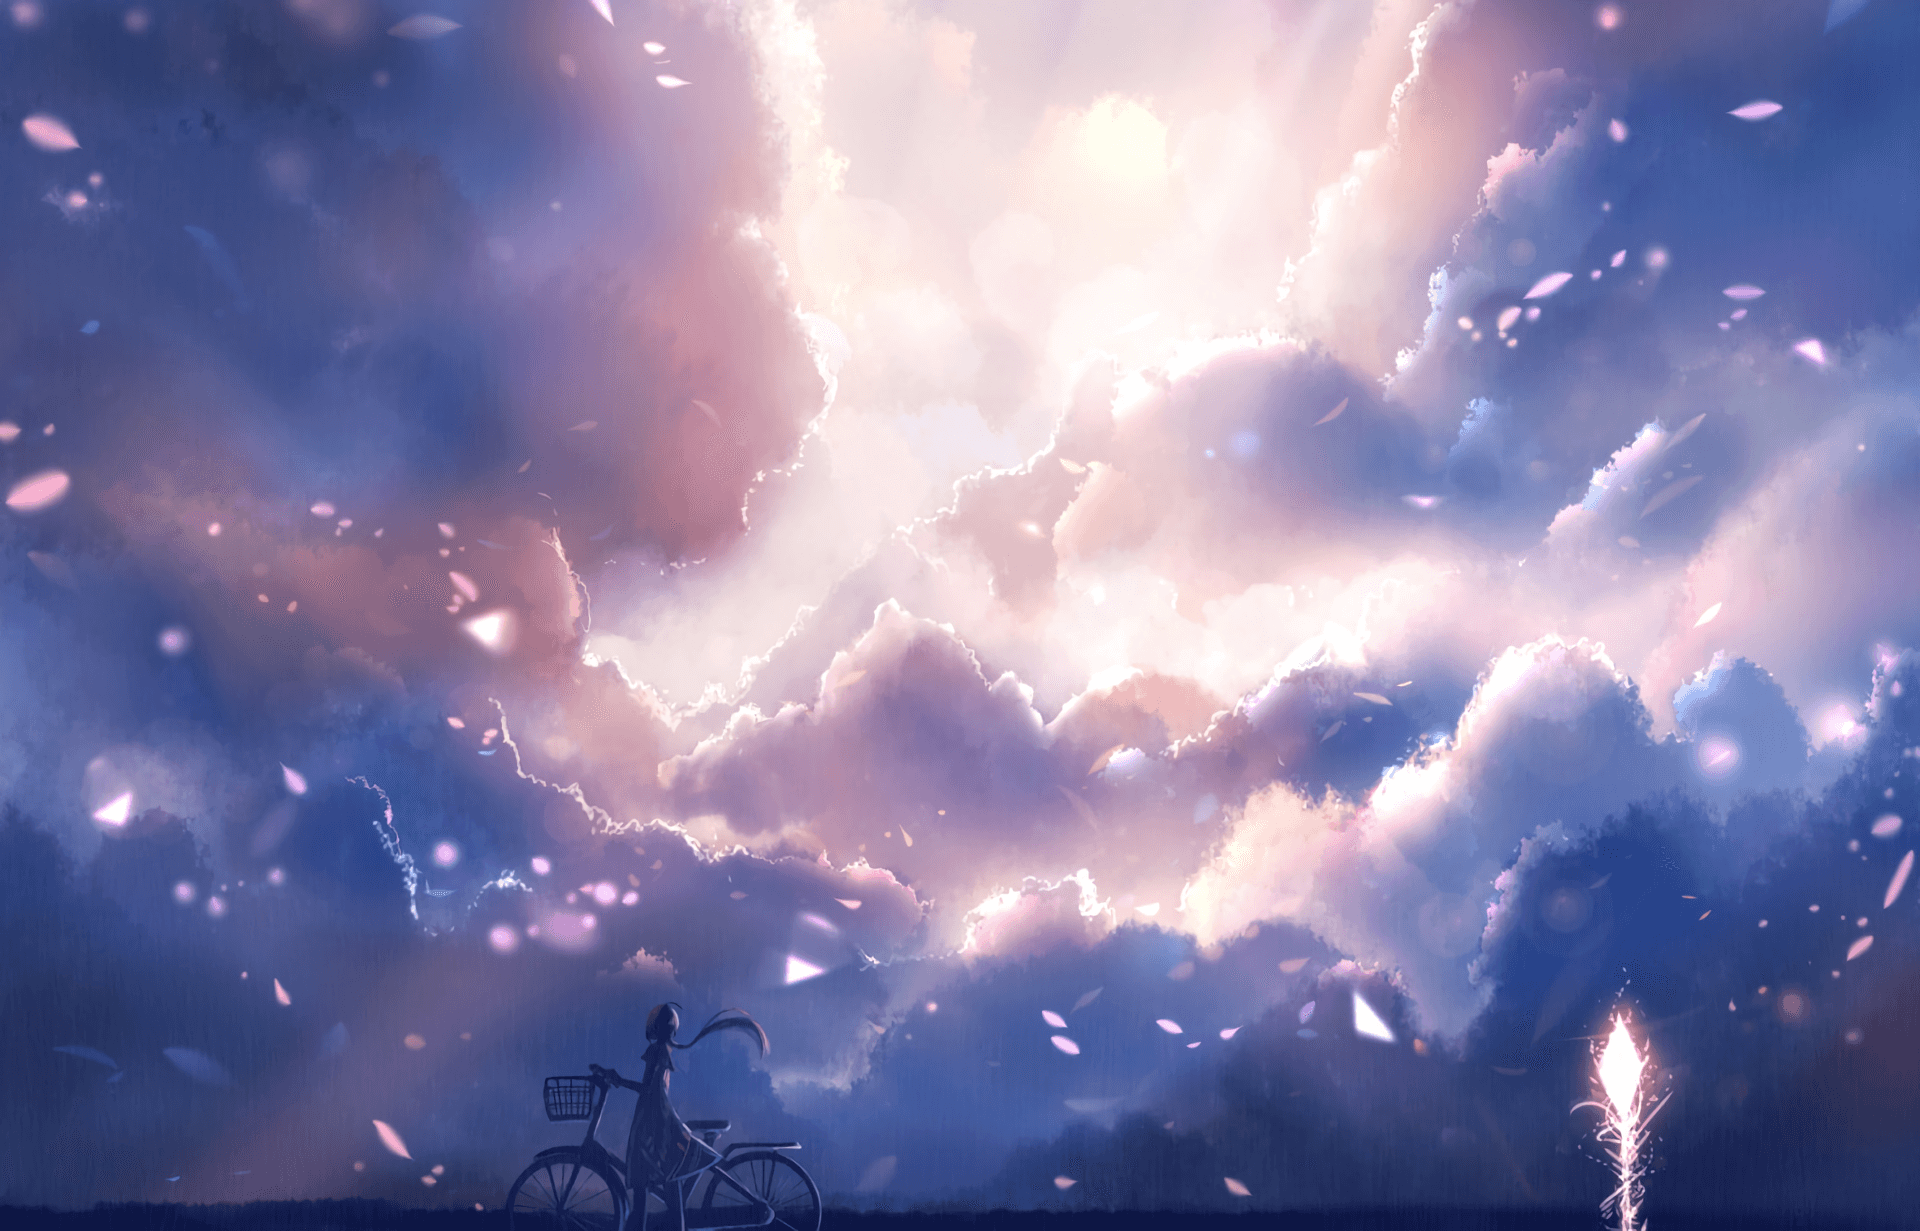 Look up and find endless possibilities in this anime-themed sky.